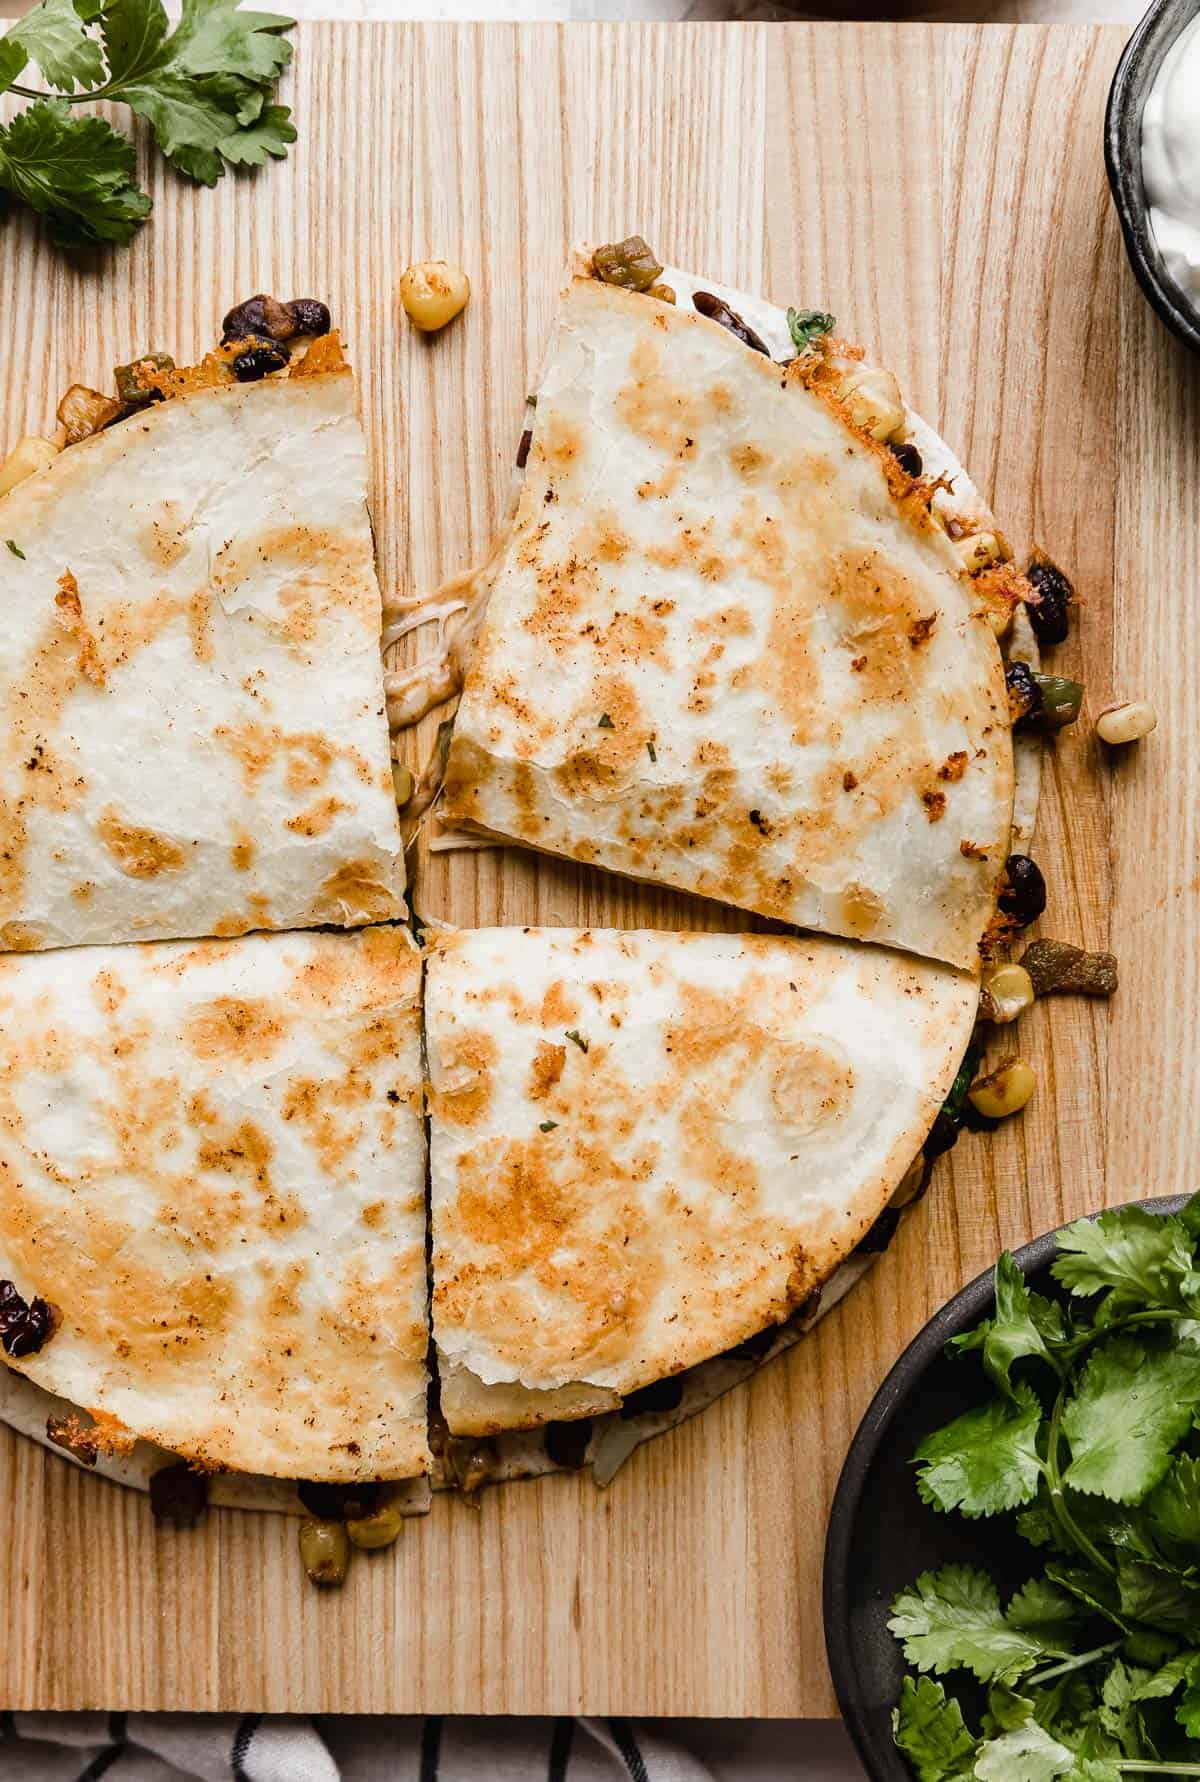 A Black Bean and Corn Quesadilla on a brown boat surrounded by cilantro.